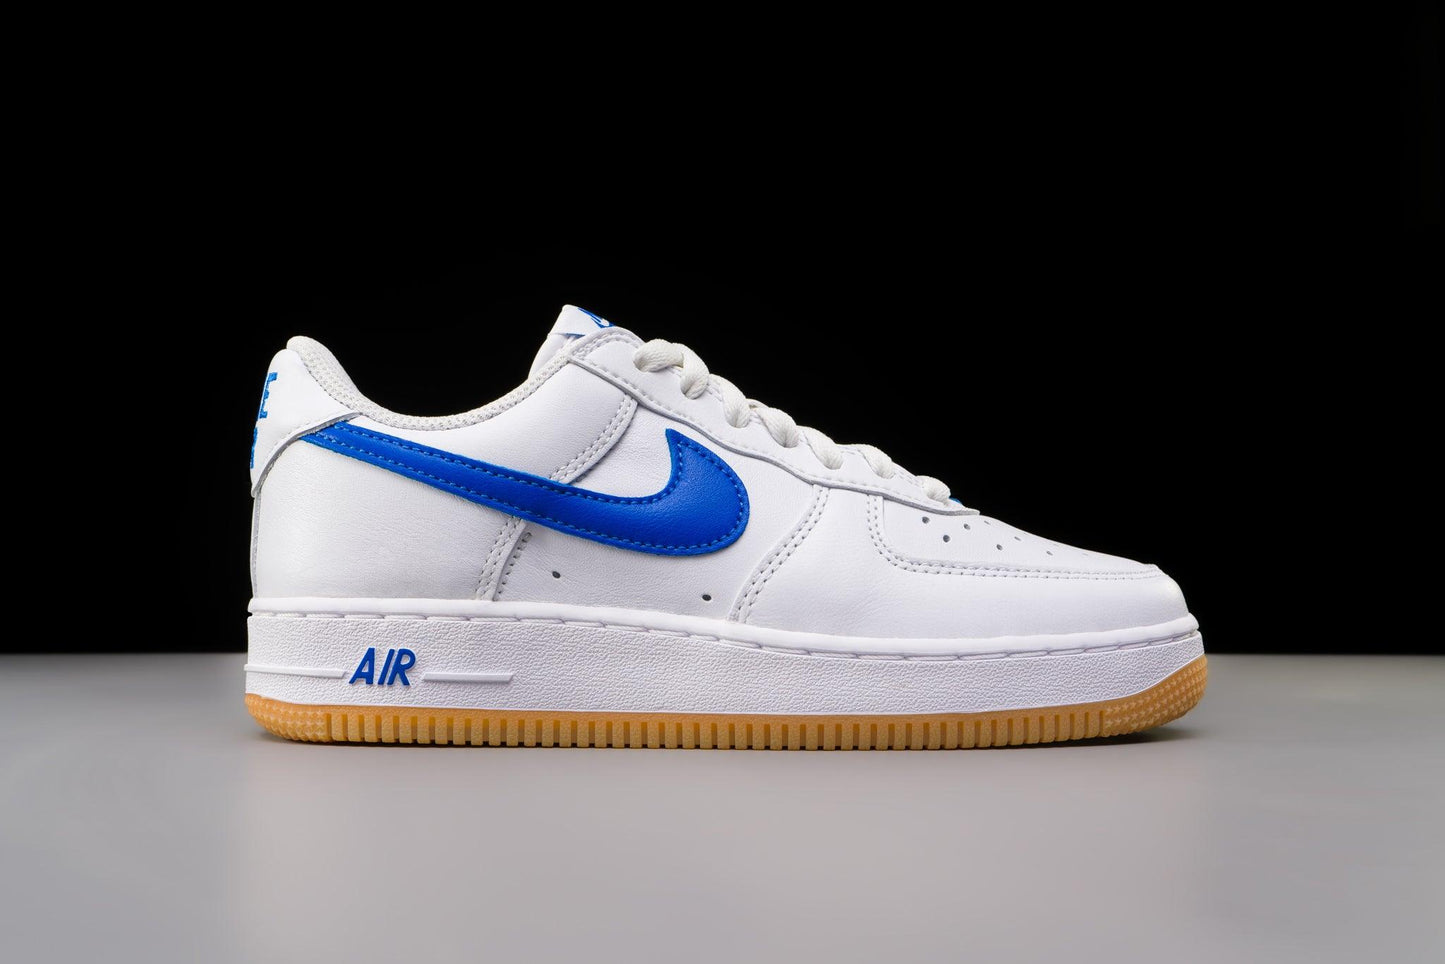 nike air force 1 07 low color of the month varsity royal gum lo10m 1 1445x